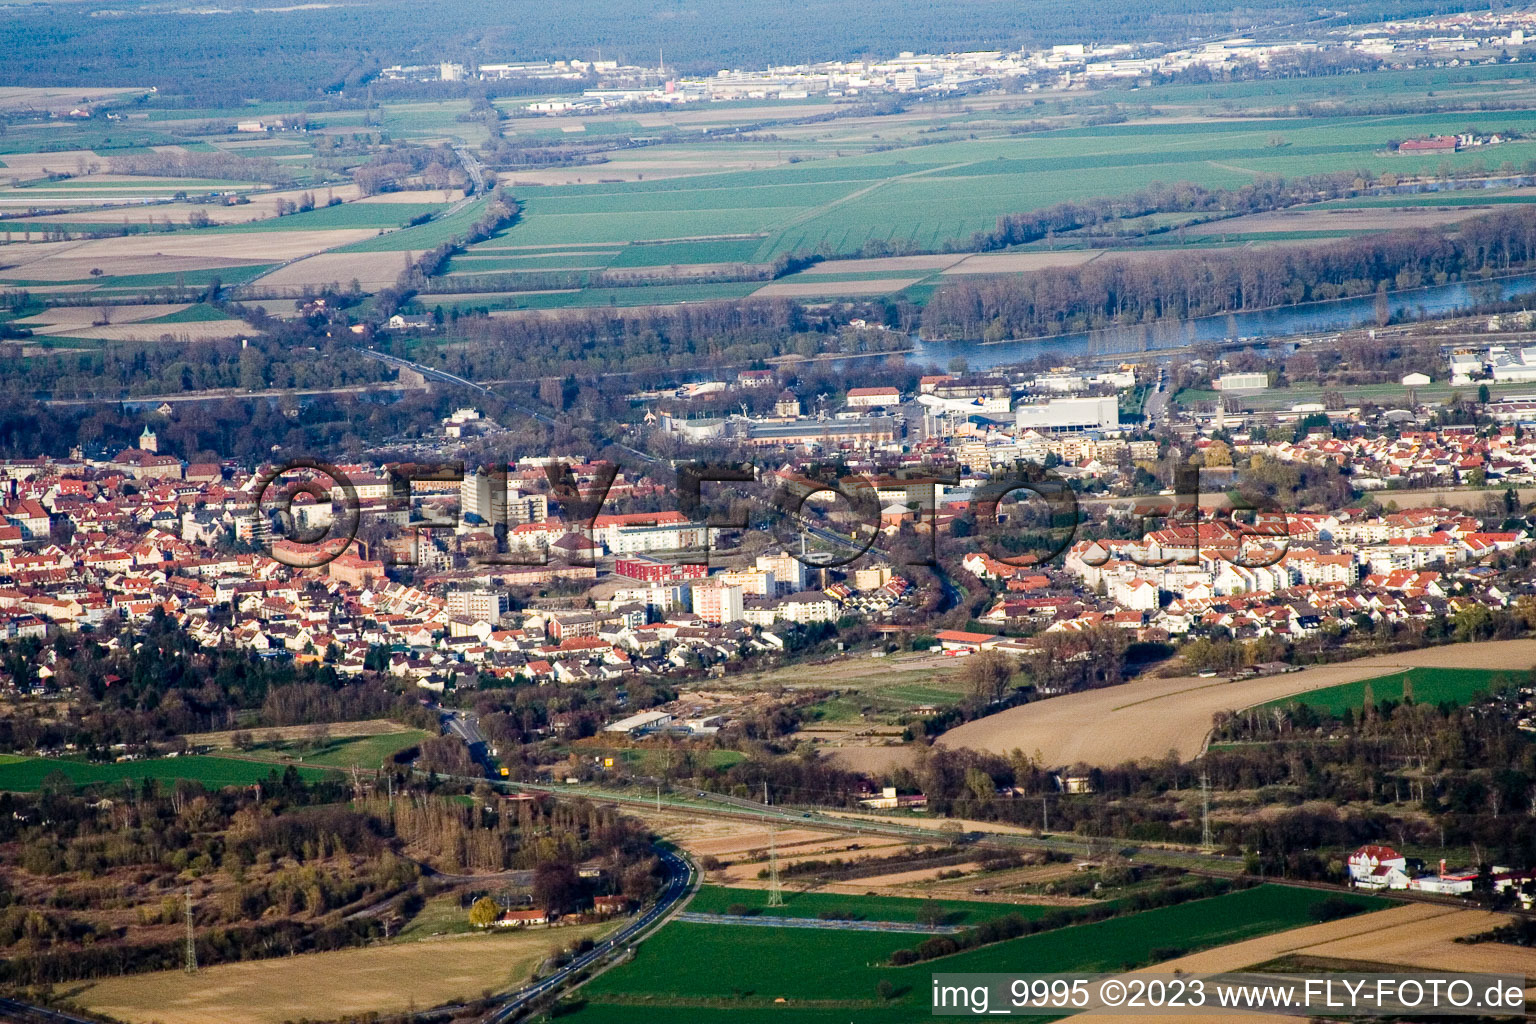 Drone image of Speyer in the state Rhineland-Palatinate, Germany